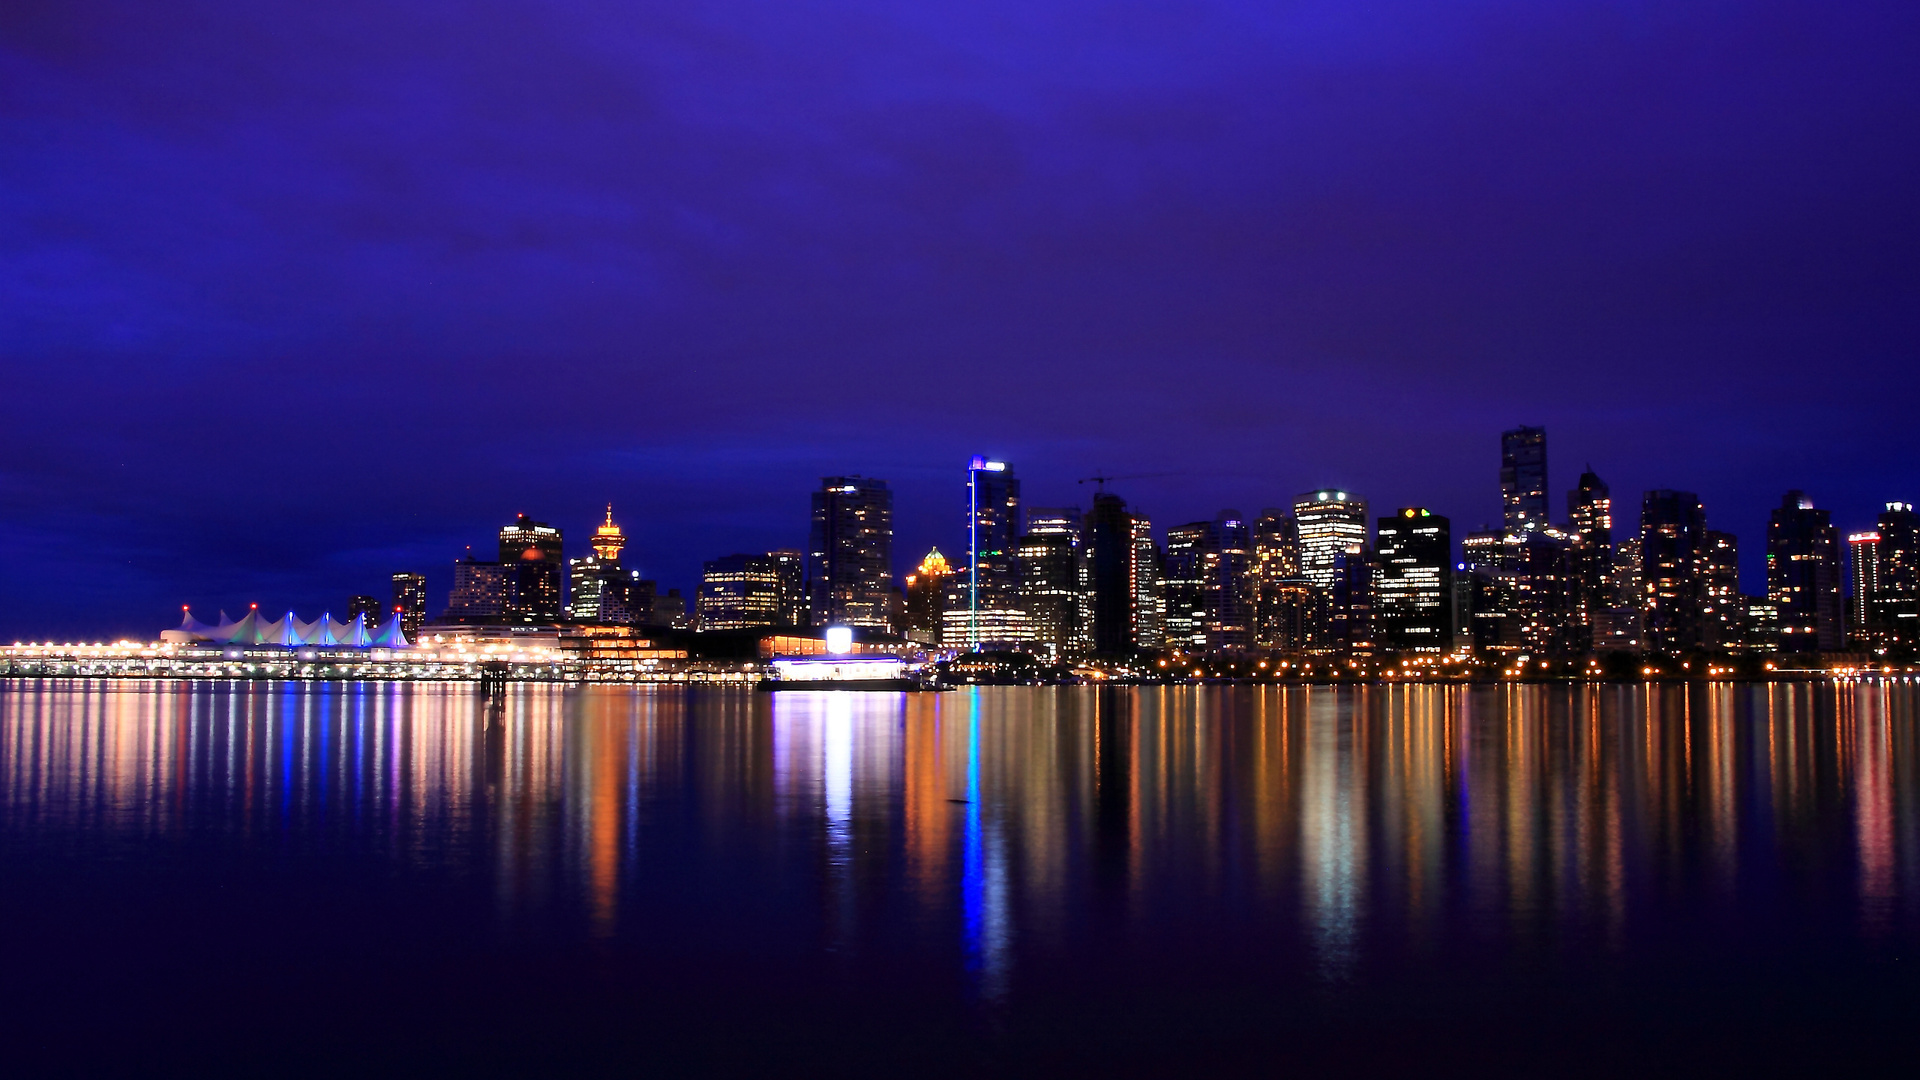 reflection, night city, british columbia, lights, Canada, vancouver, , river